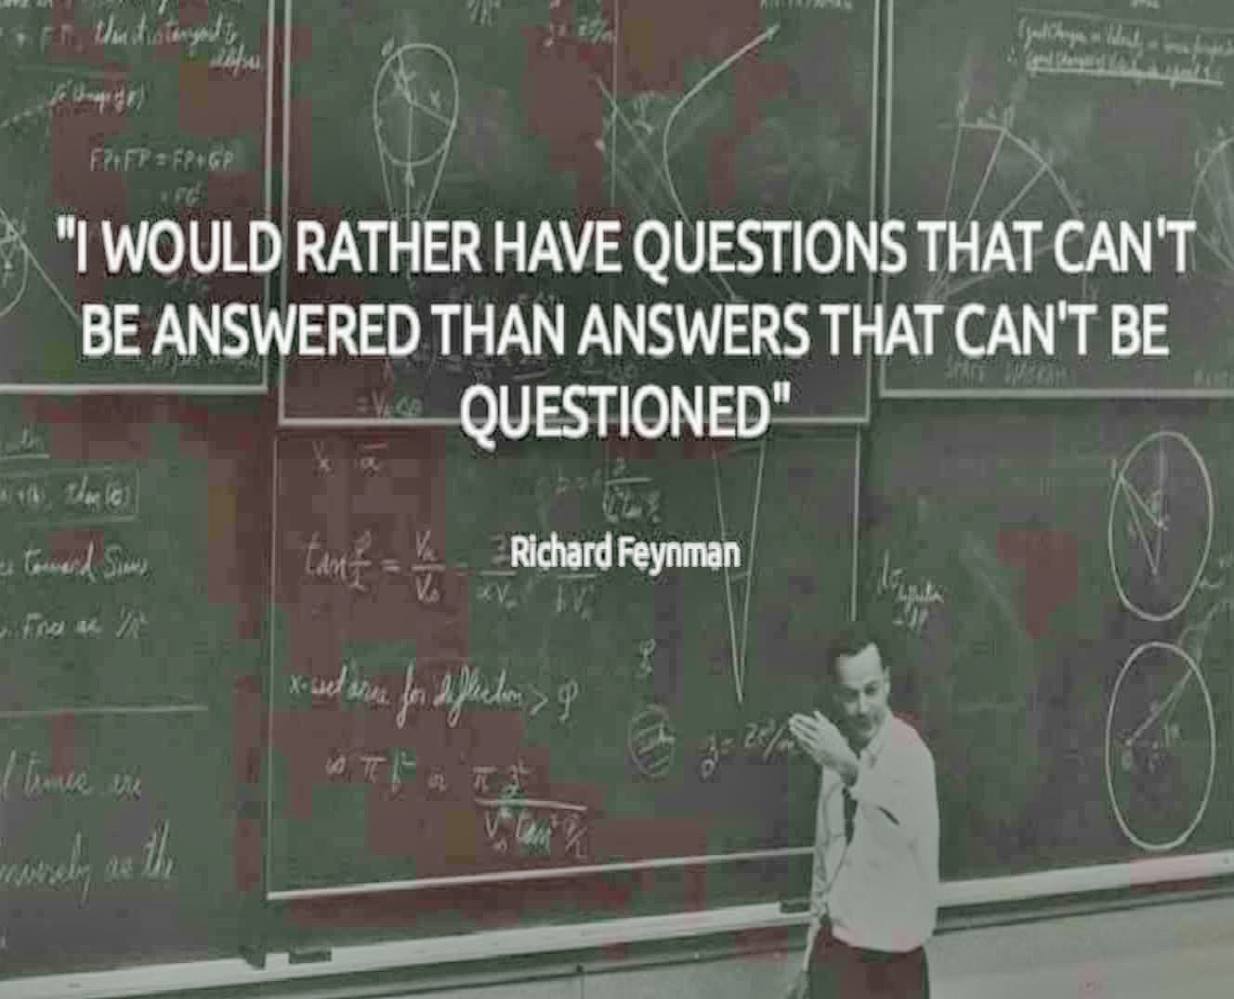 i would rather have questions that can't be answered than answers that can't be questioned